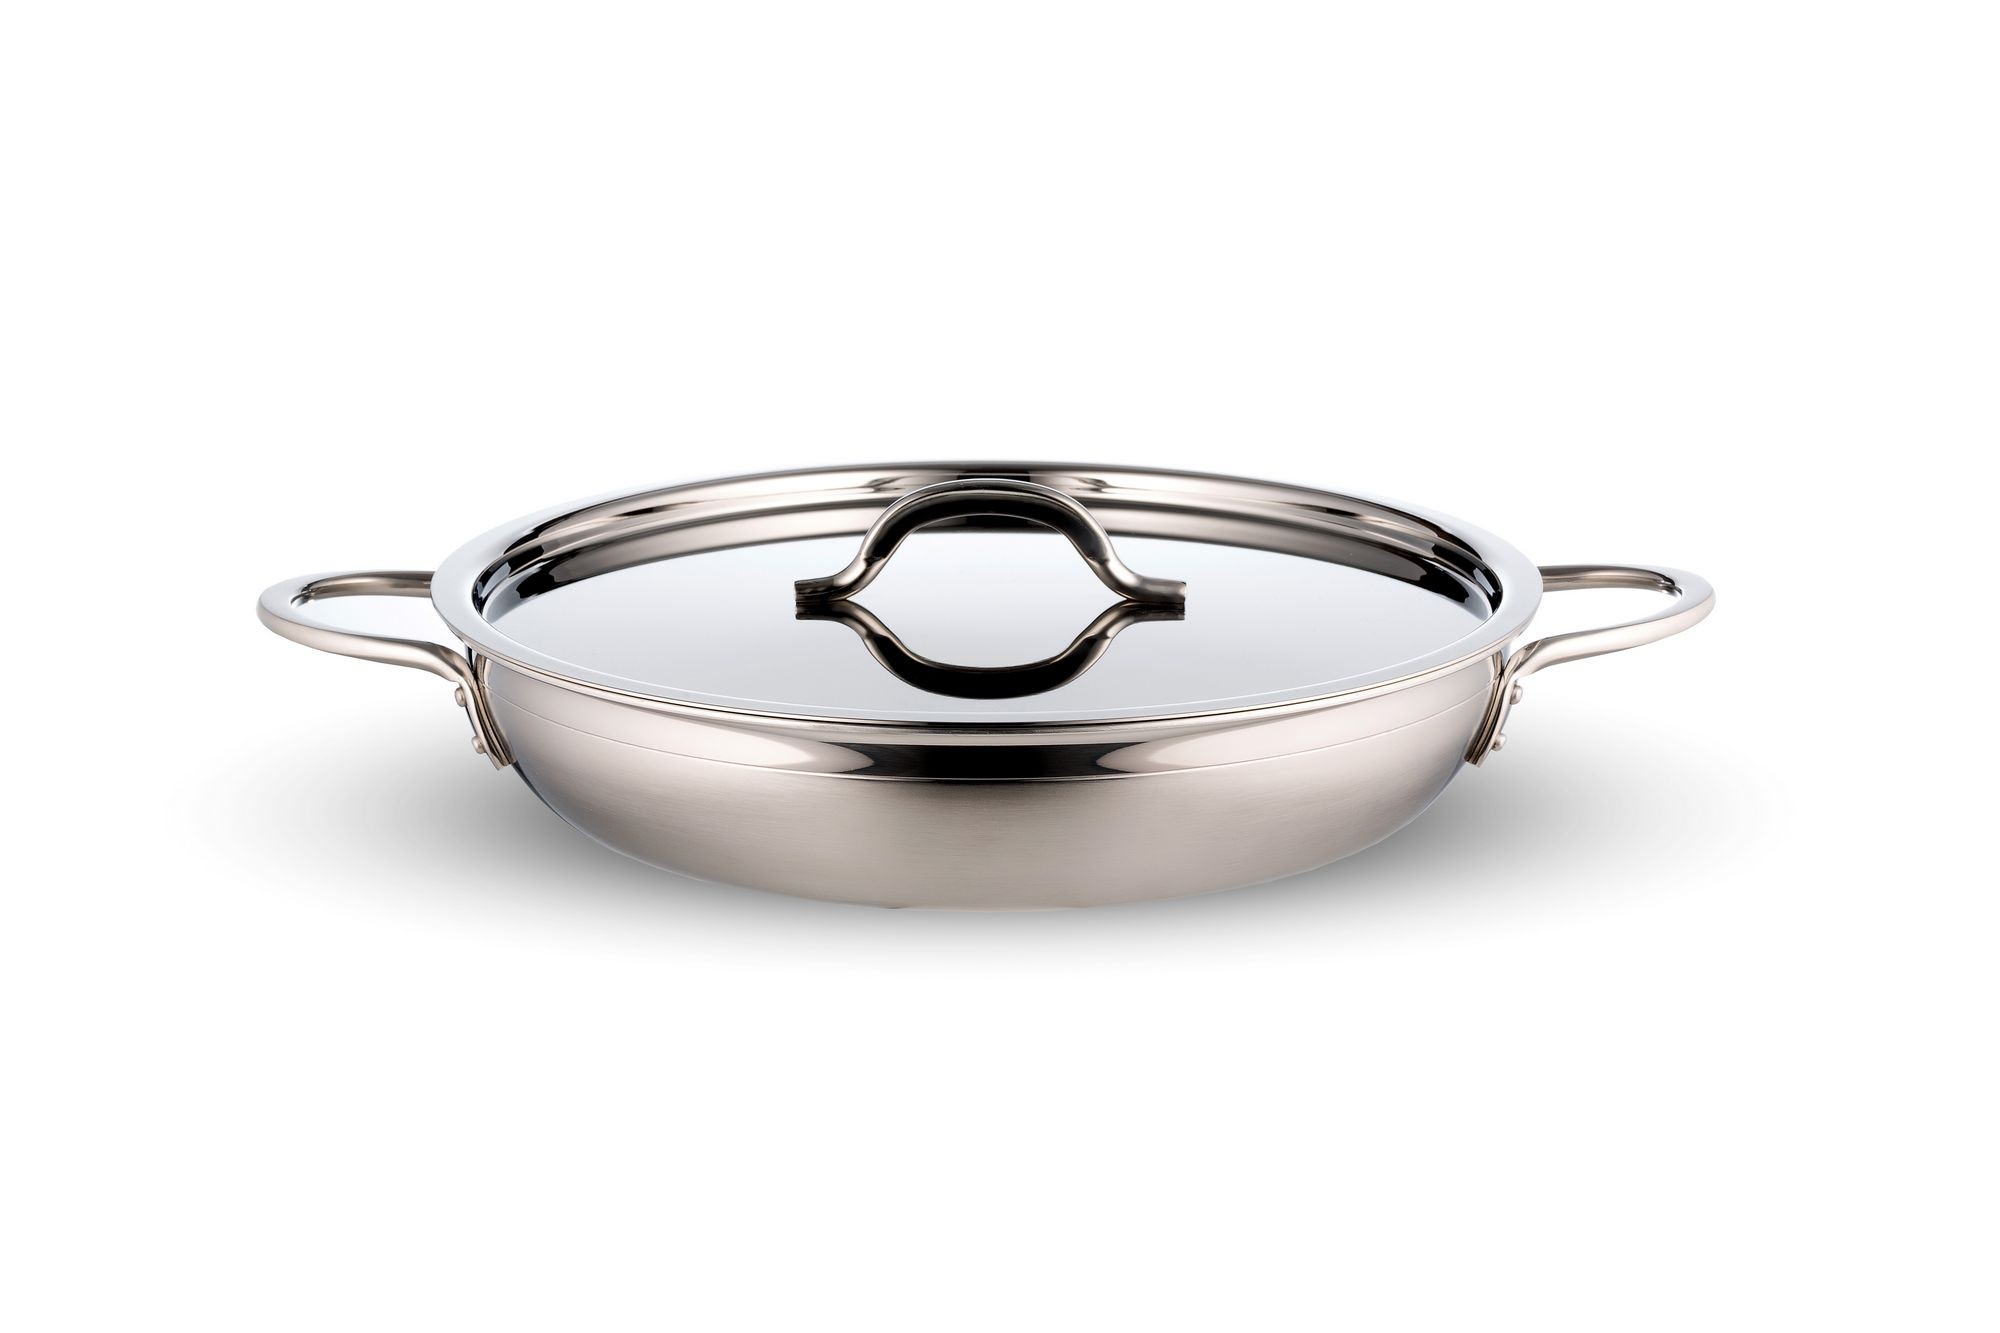 Bon Chef 60306-2ToneSS Country French Two Tone Stainless Steel Saute Pan with Cover, Double Handle, 3 Qt. 4 oz.